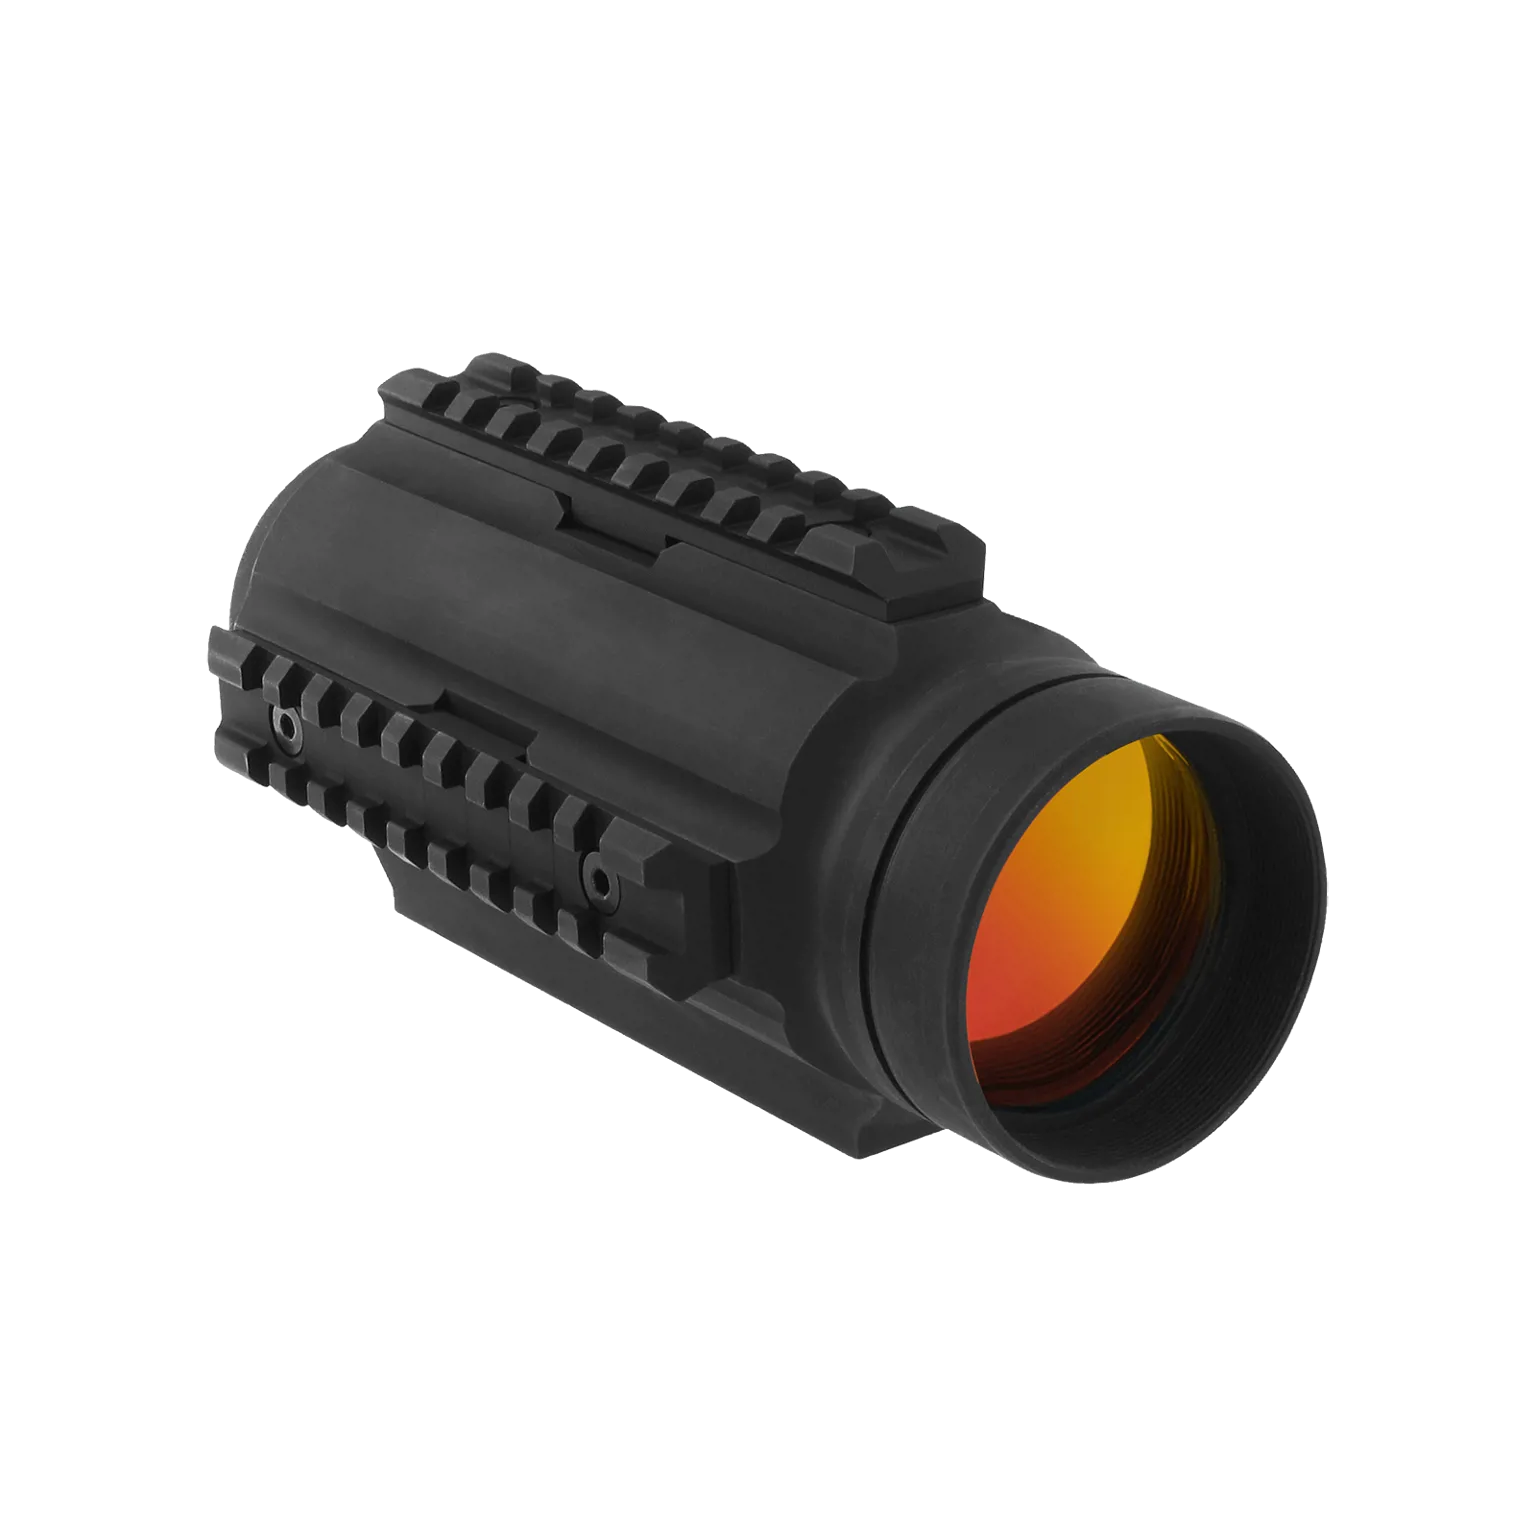 MPS3™ 2 MOA - Red dot reflex sight without mount - 2